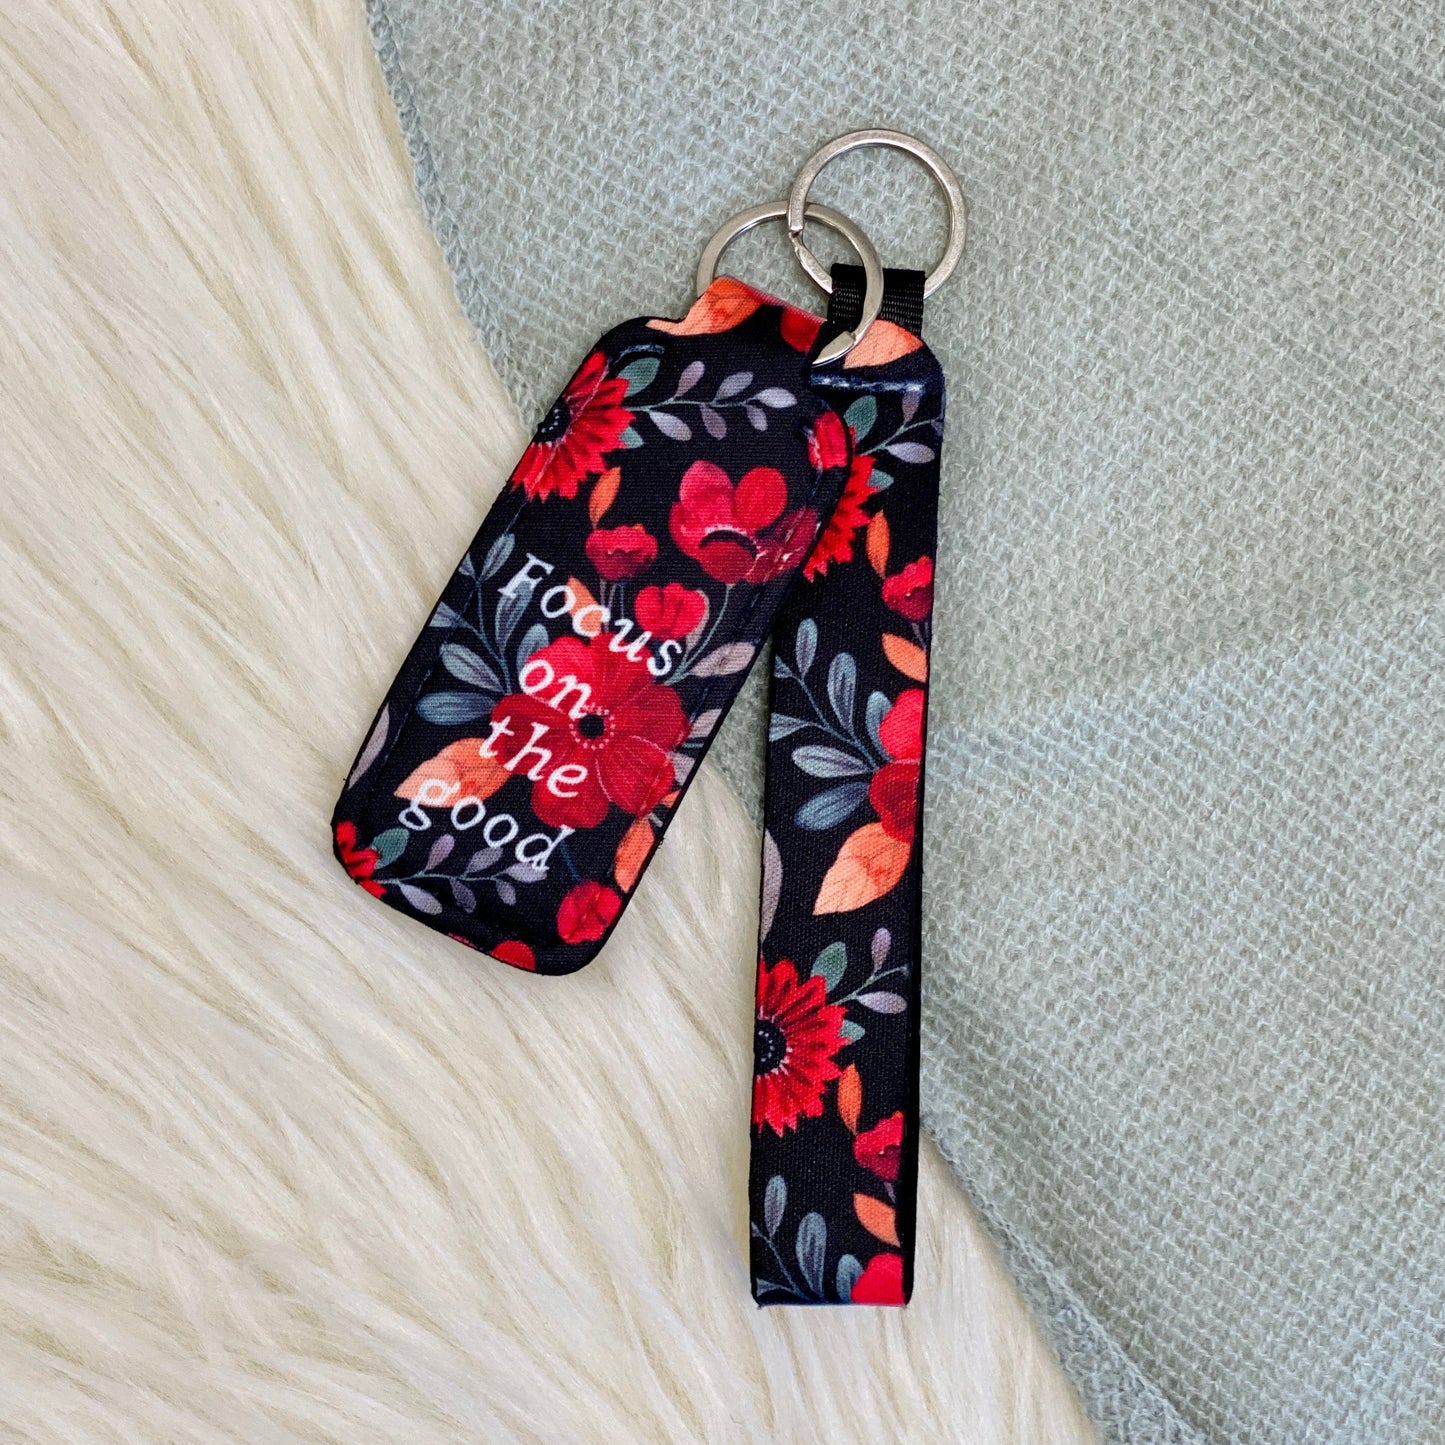 Focus on the Good Lipbalm Holder & Keychain Our floral print Lipbalm Holder & Keychain is not just a cute gift for her, it is also practical. It has a lipbalm holder and a keychain so you can attach it to your purse, backpack or keys, and then you never have to worry about misplacing it. The floral print lipbalm holder is the perfect stocking stuffer for women of all ages.  Red/black Floral  Keychain measurements: 5" Lipbalm holder measurements: 3.75"x1.5"